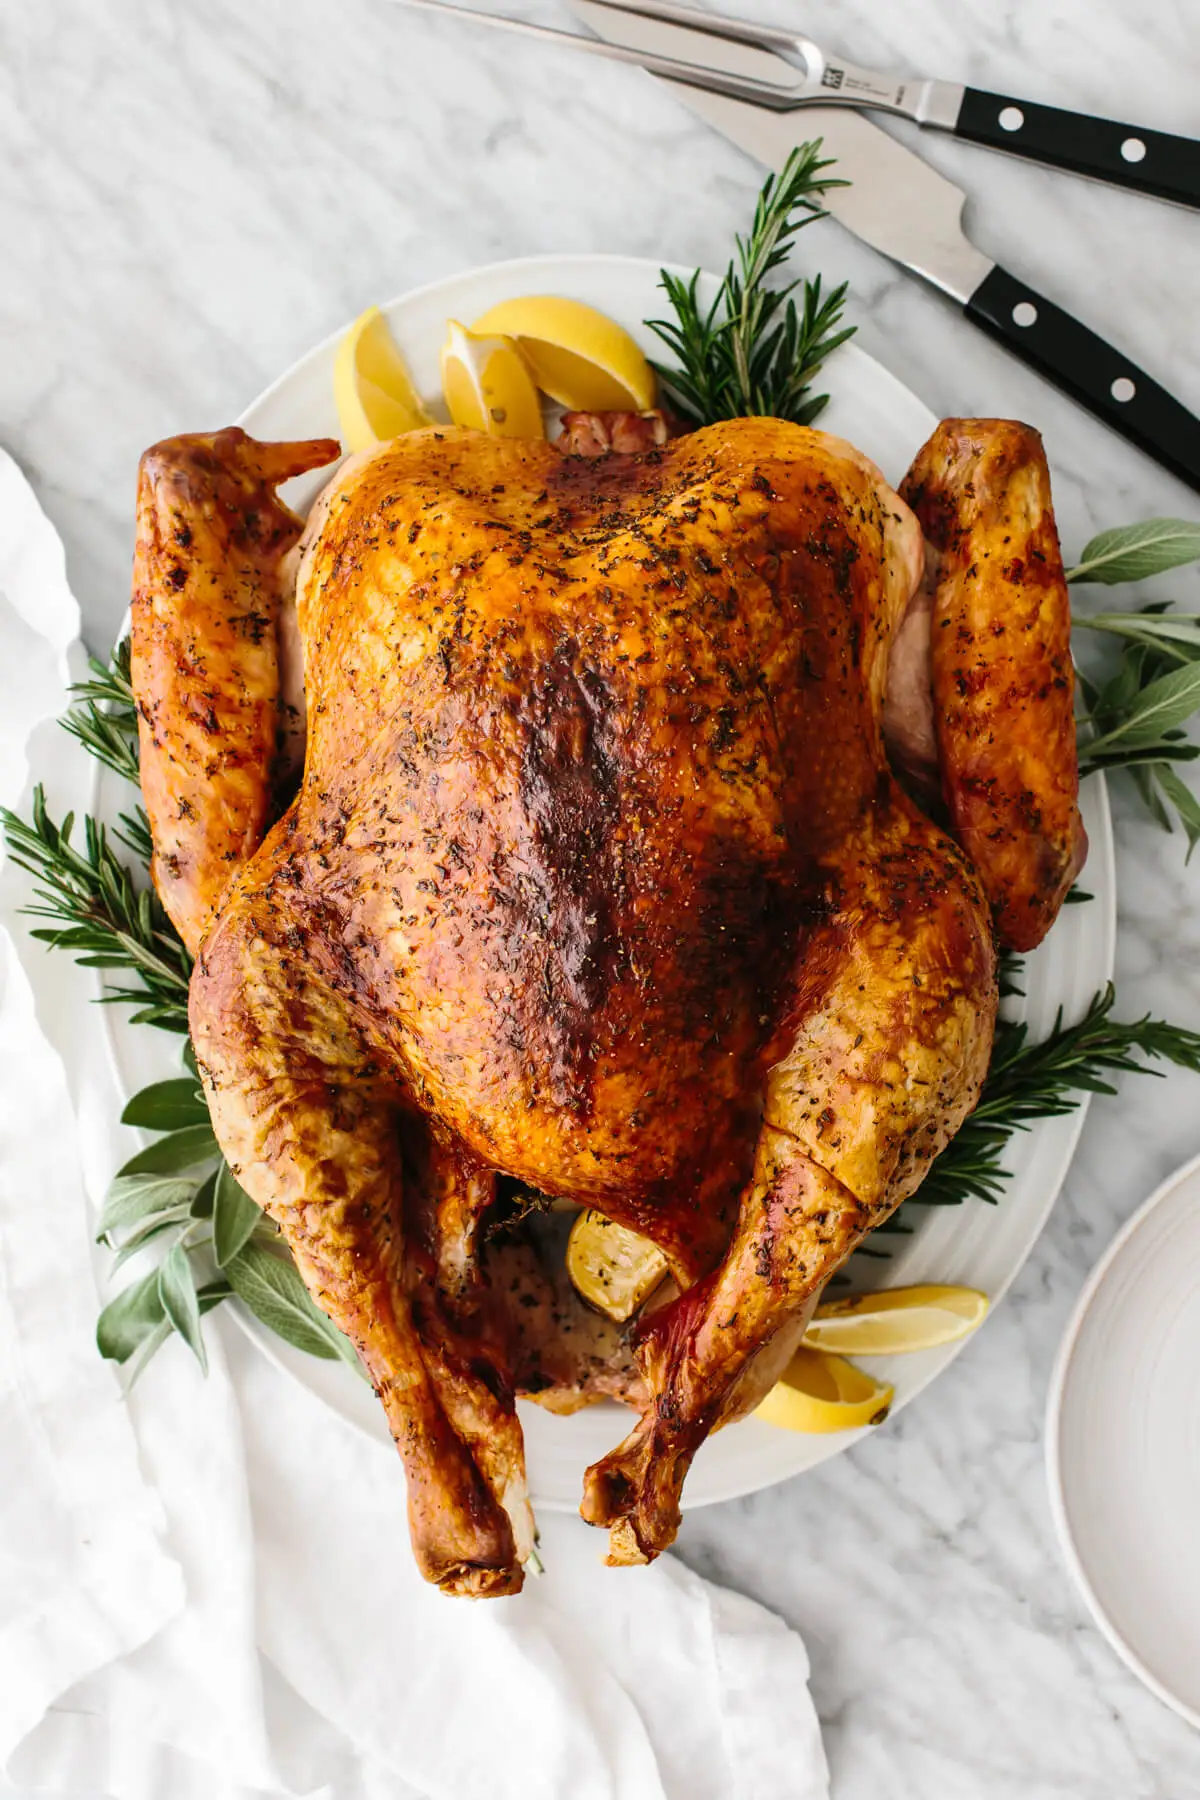 Feast your eyes on '10 Thanksgiving Dinner Must-Haves for The Perfect Meal,' where we delve into the absolute essentials of the grand Thanksgiving feast. From the star turkey to the final sweet note of a pie, we've got you covered for a meal that's both delicious and memorable